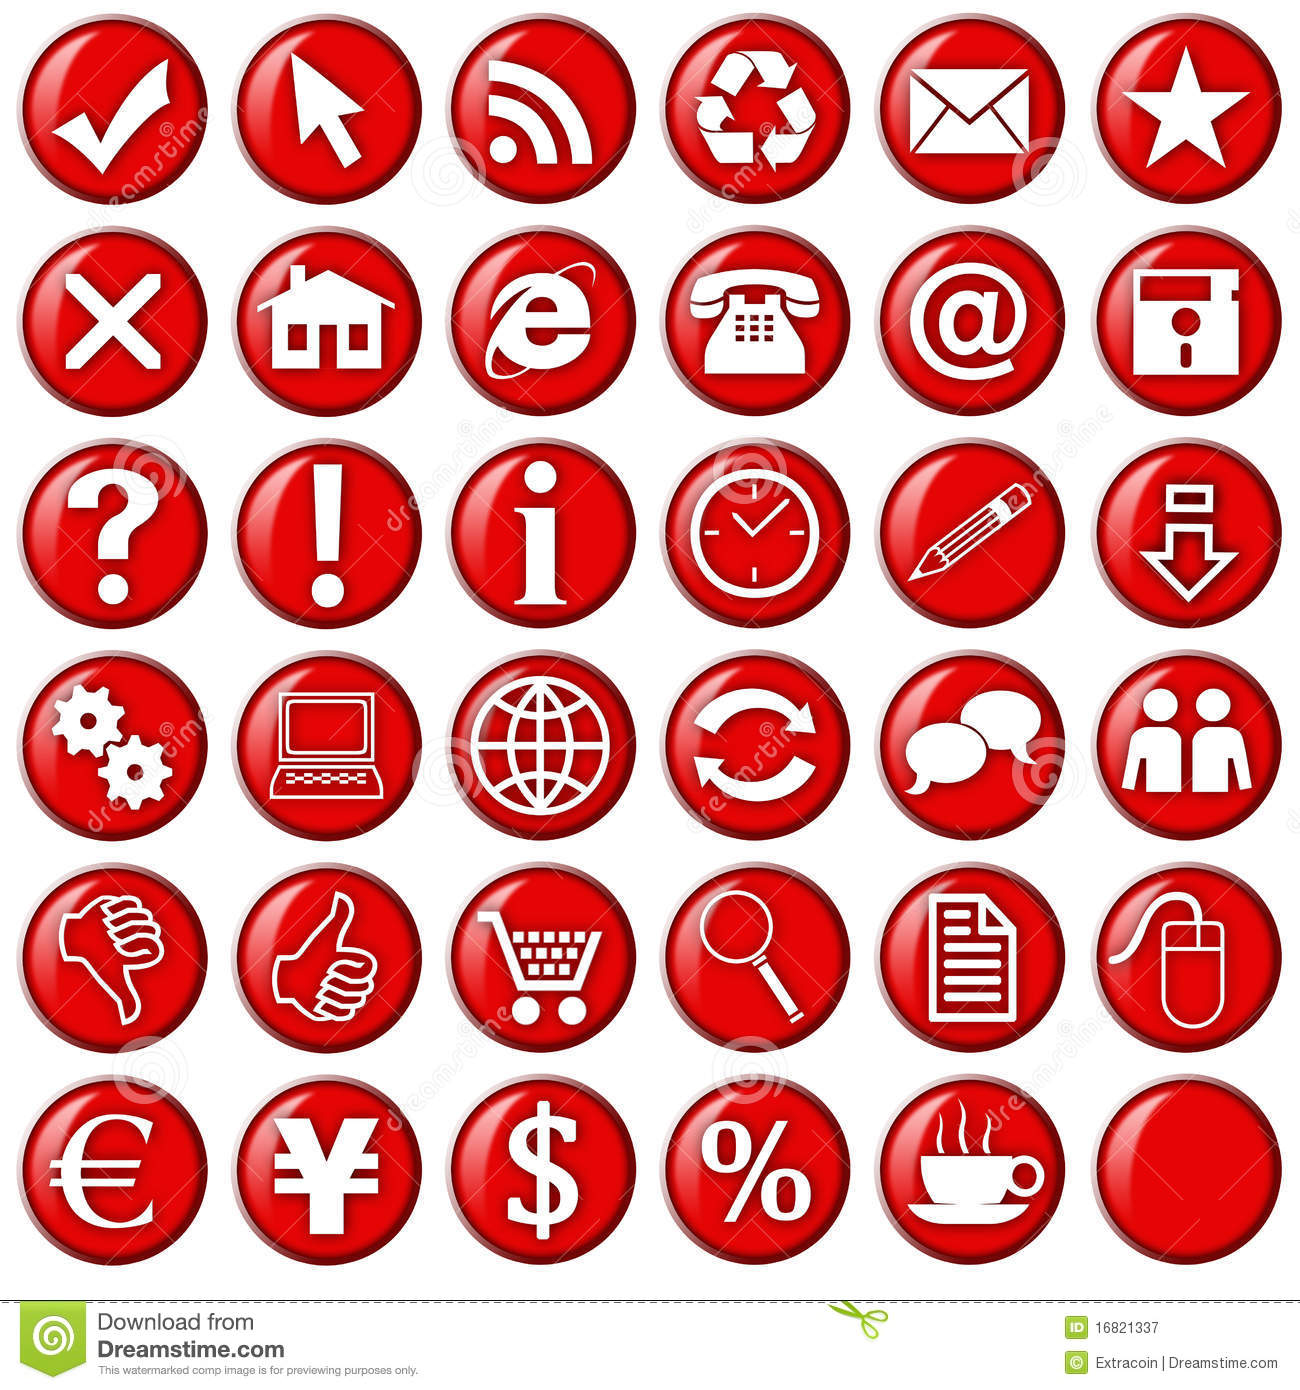 Free Website Icons and Buttons